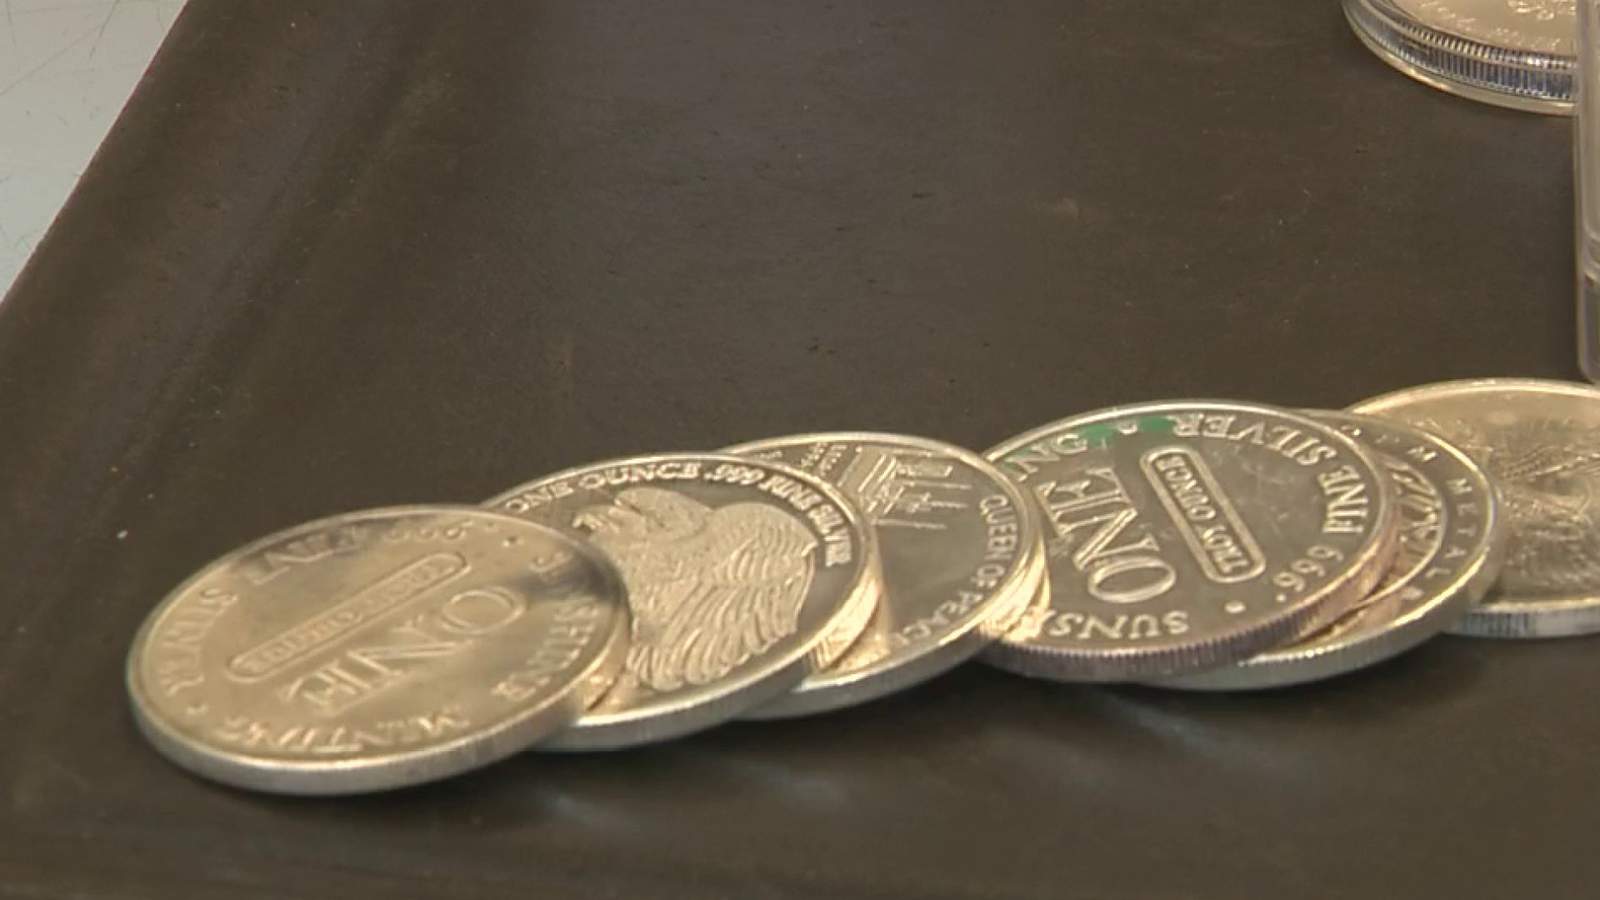 Local investors take a shine to silver as price surges